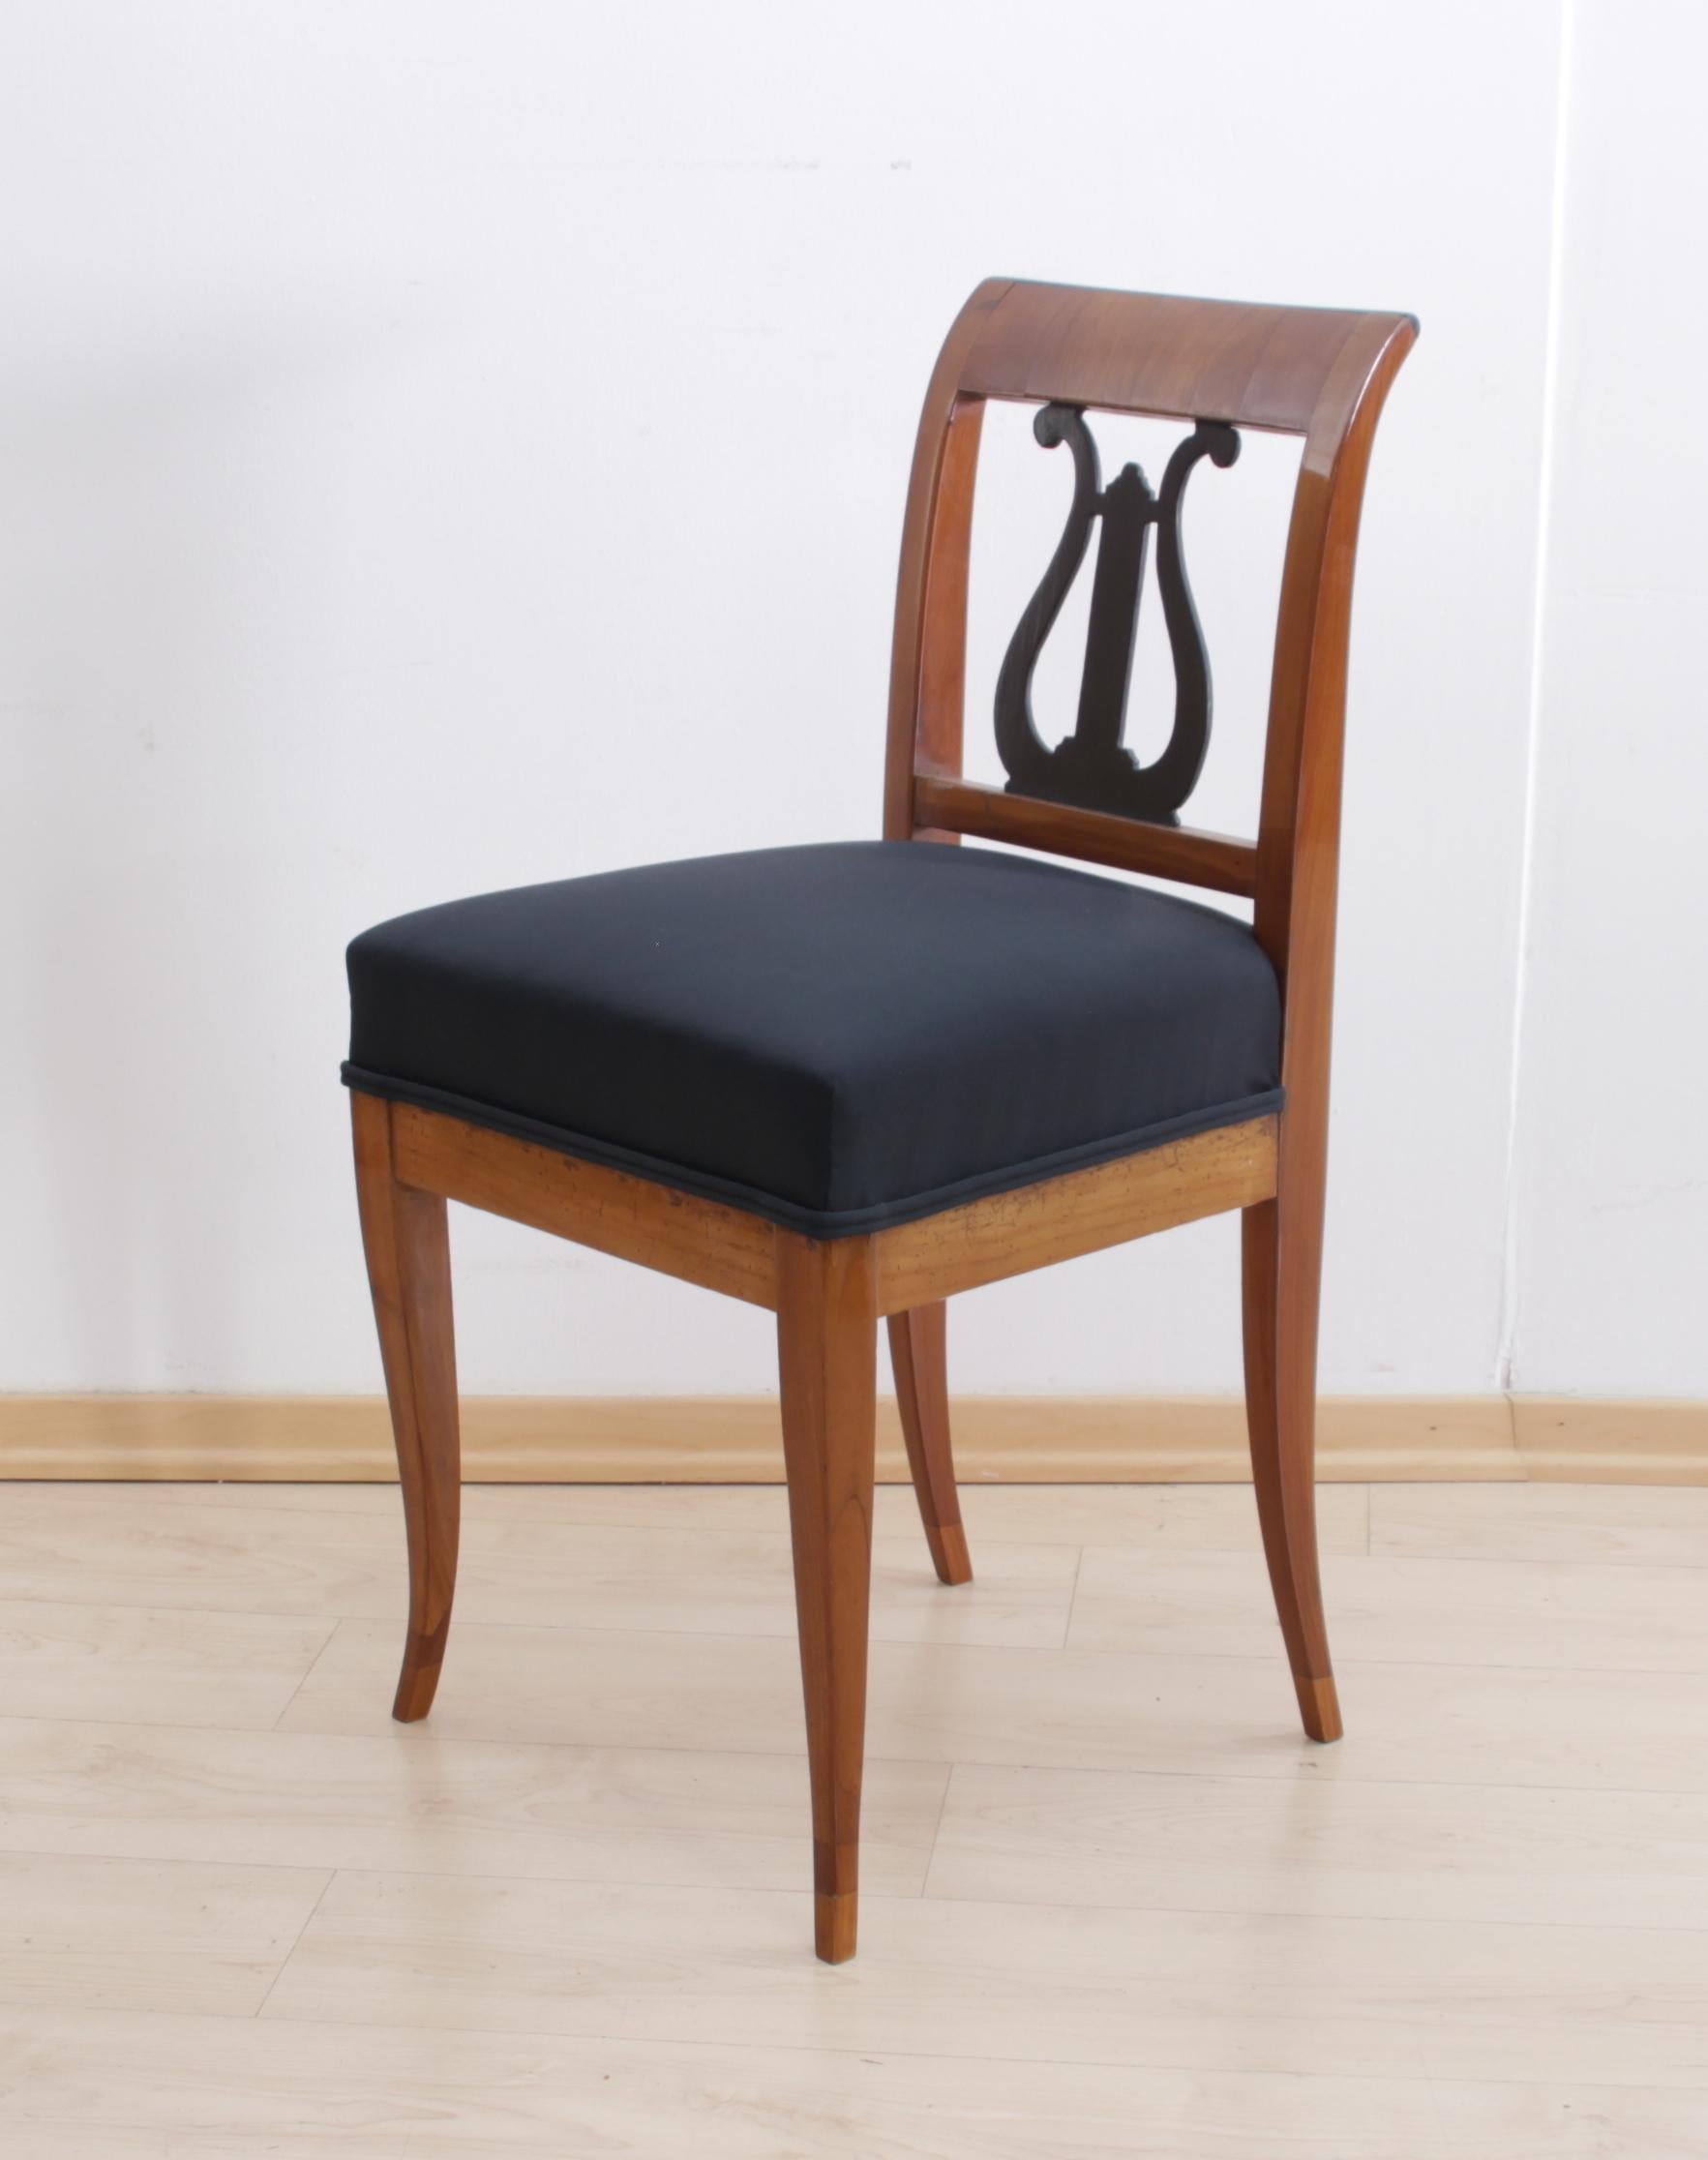 Wonderful, classic early Biedermeier chair from South Germany, circa 1820.

Beautiful ebonized back decor in form of a Lyra, a classic classicist and Biedermeier motif.
The wood is cherry solid wood and has been hand-polish with shellac.
For the